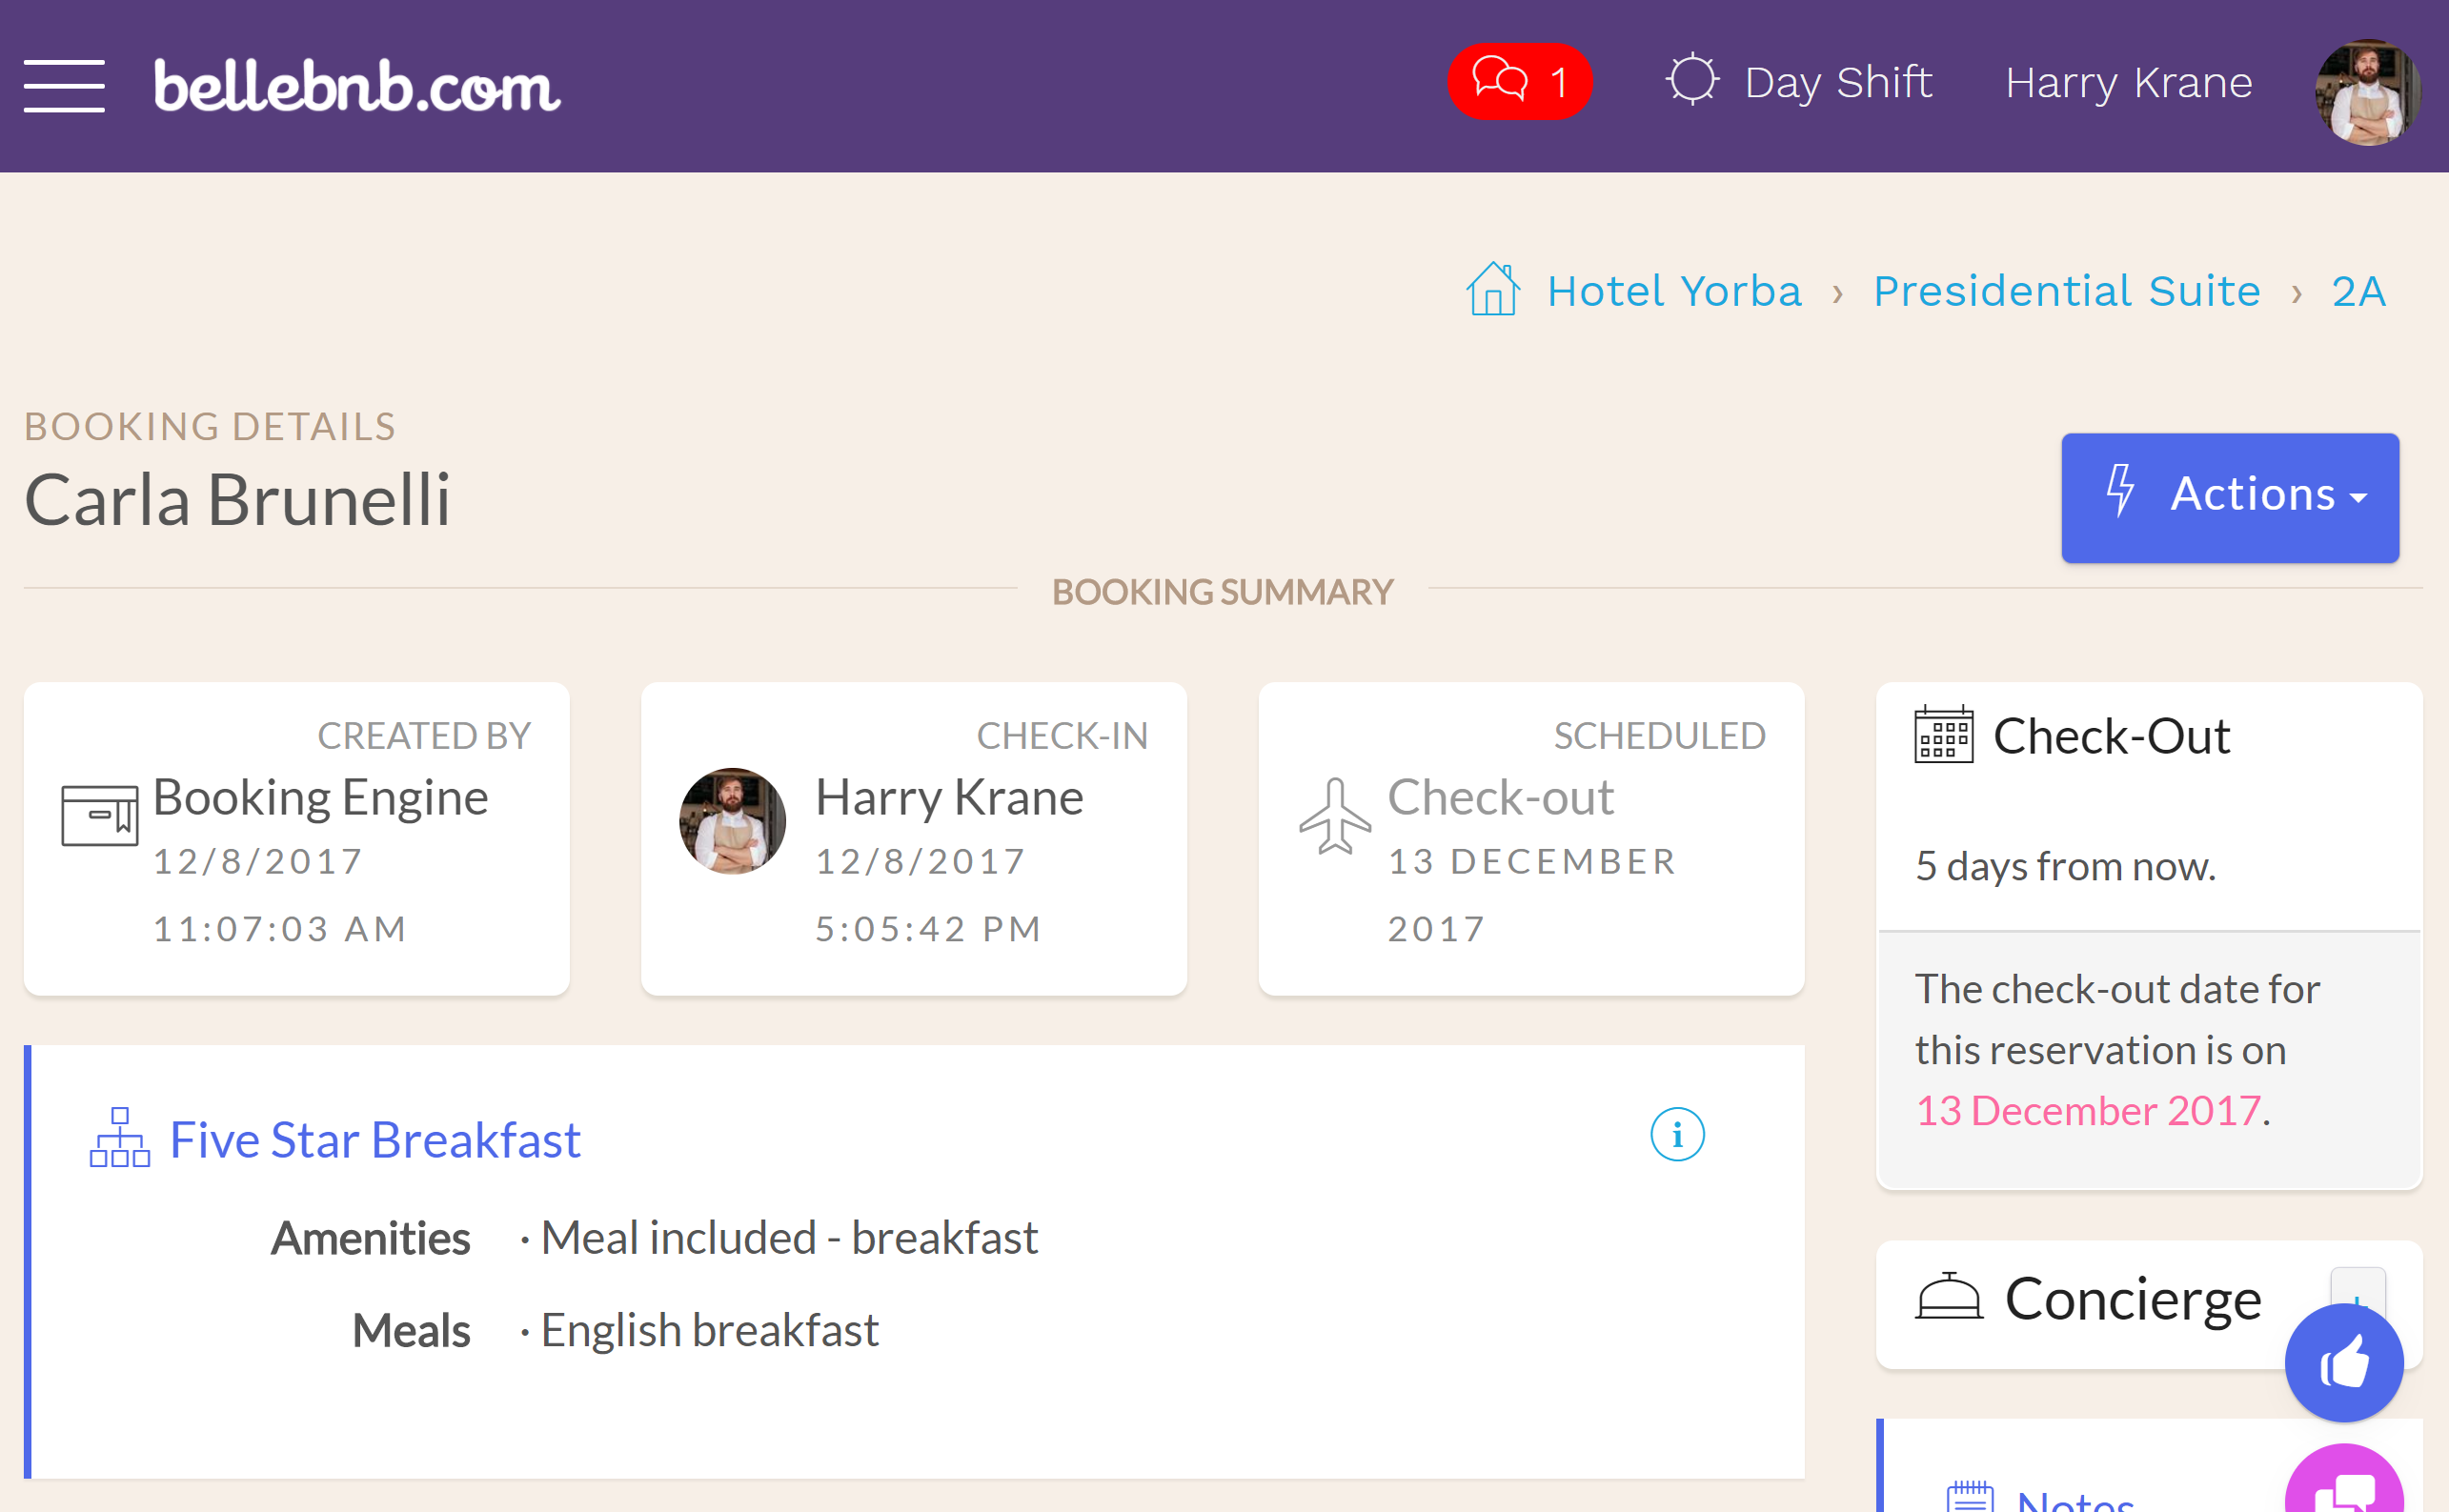  Next, click ‘Check-in’ (or ‘Actions > Check In’) to complete check-in. You will see the reservation has turned green in your calendar to indicate it has been checked in, and it’s no longer listed as ‘Check-in Today’ in your Inbox